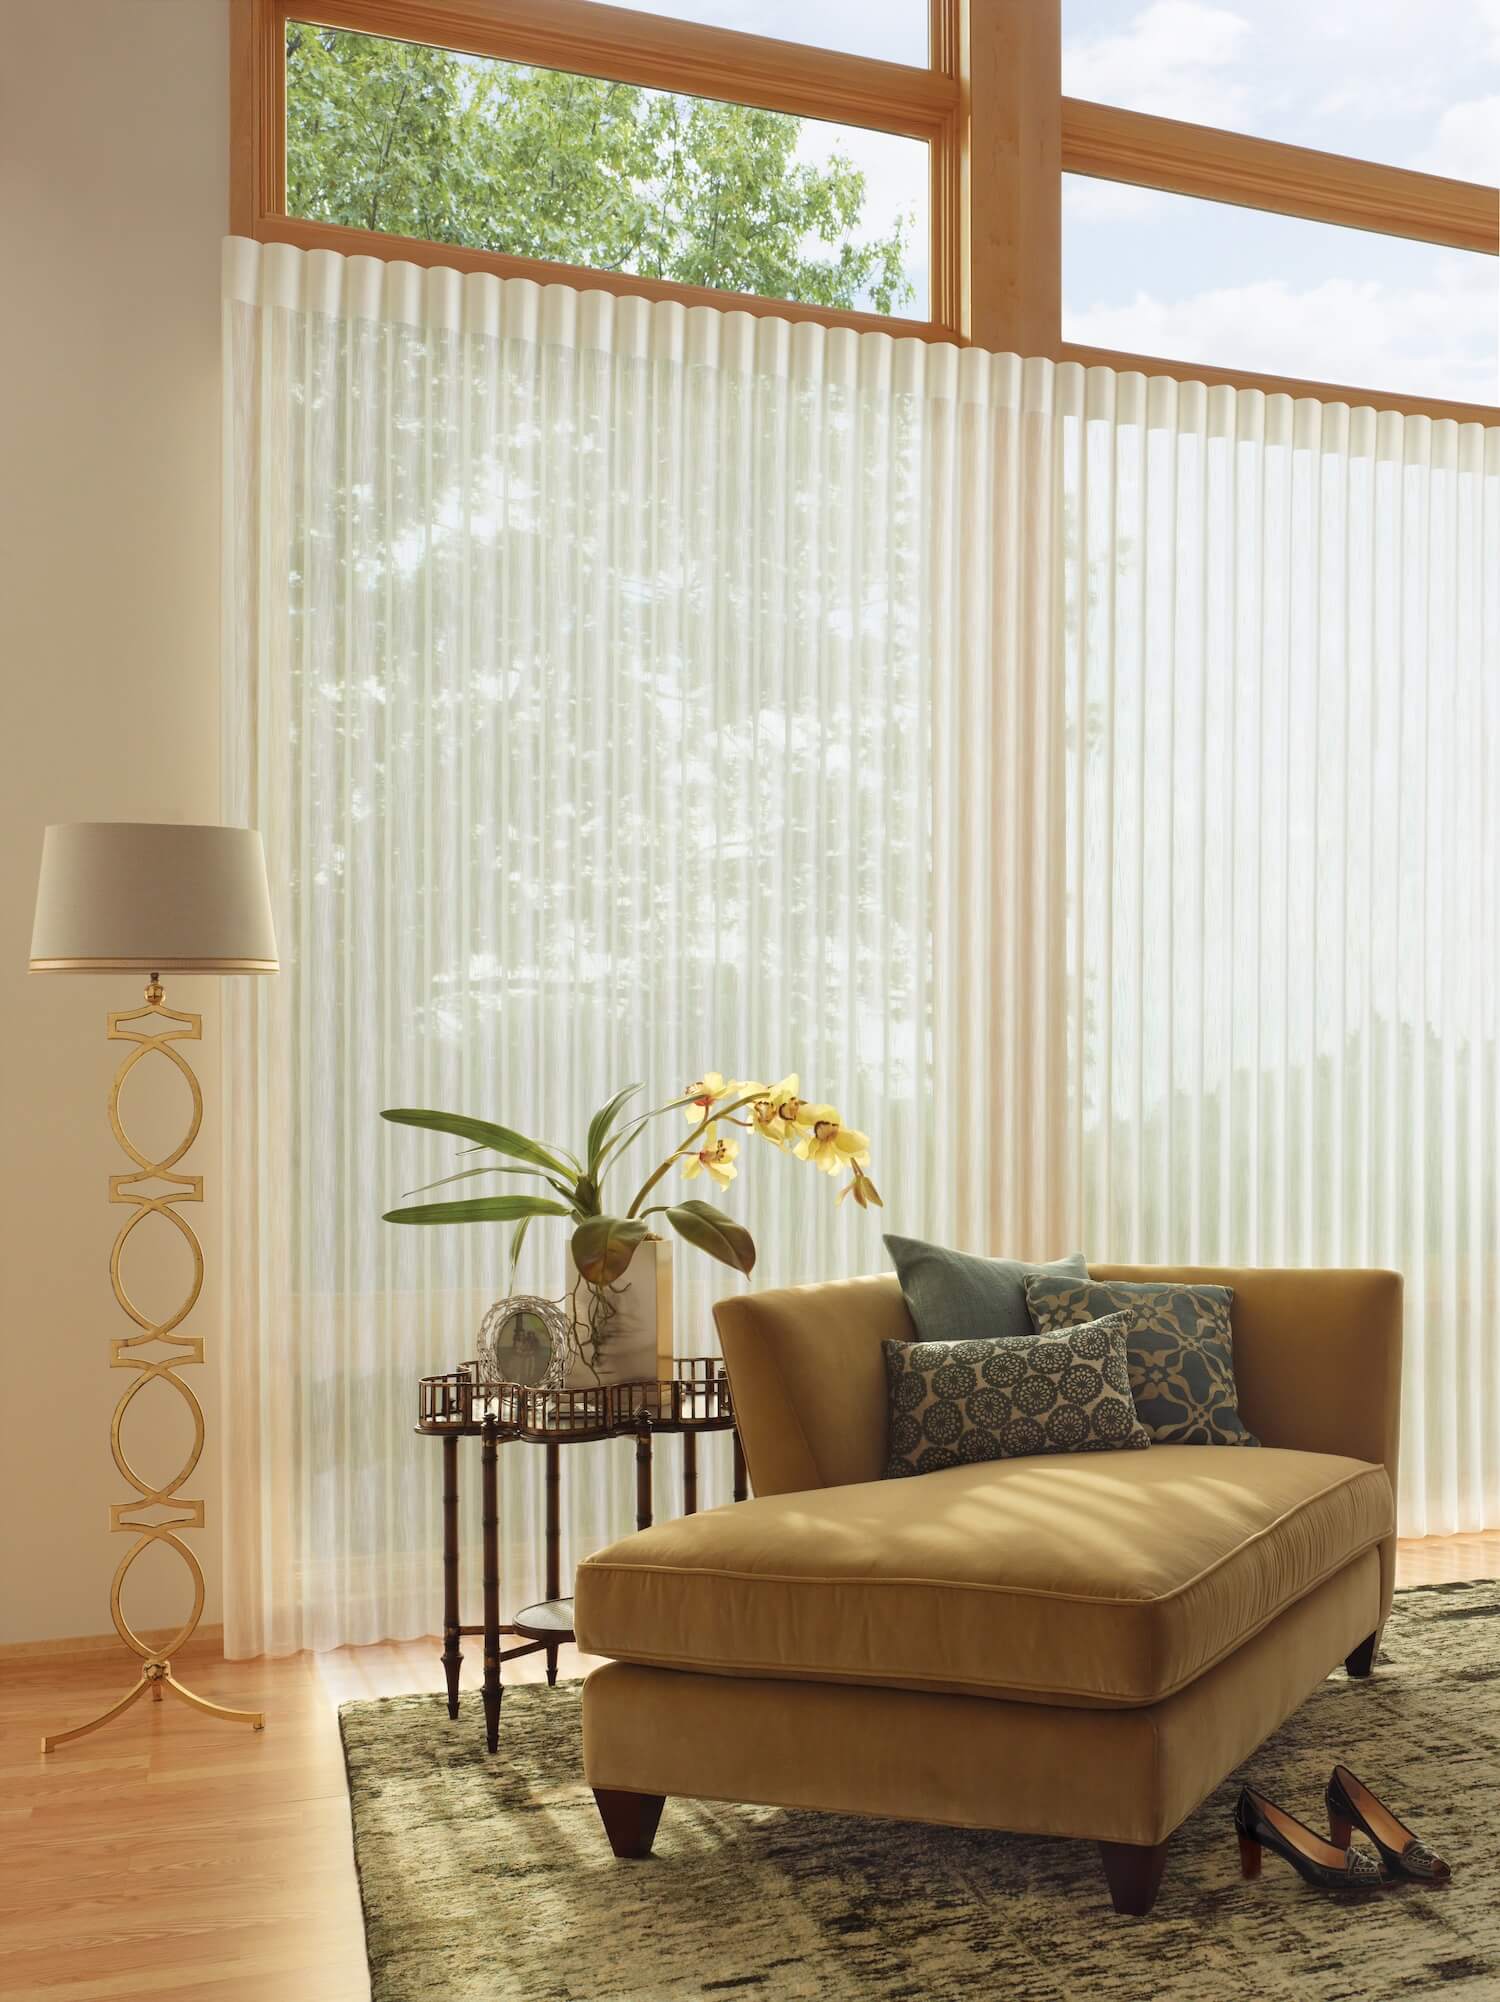 Luminette Privacy Sheers with vanes open in family room